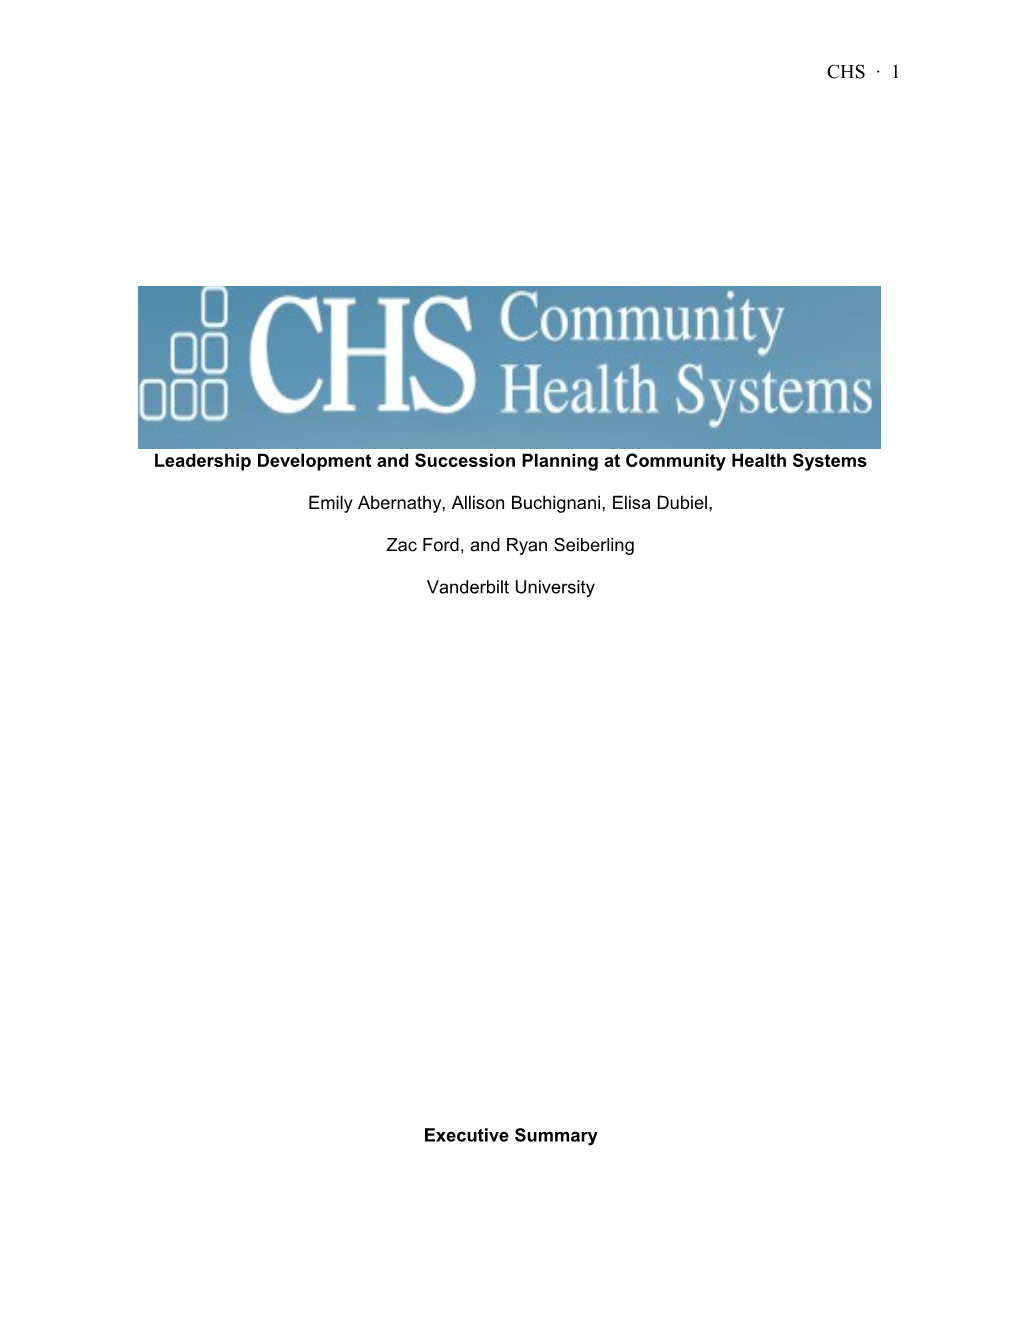 Leadership Development and Succession Planning at Community Health Systems